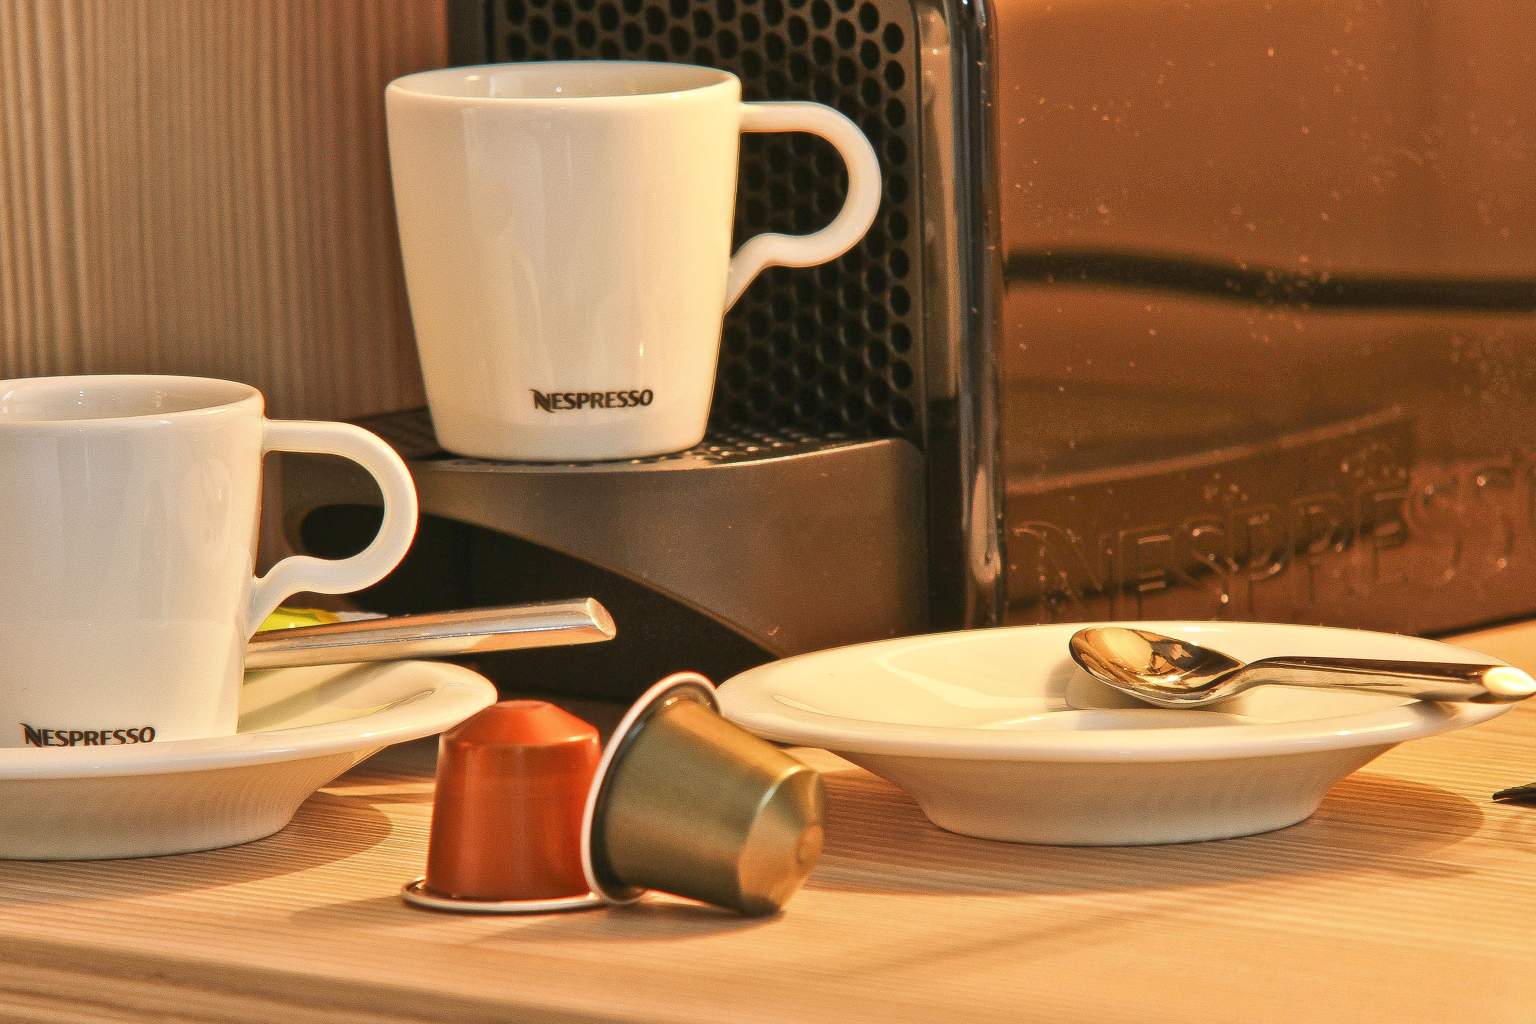 Nespresso coffee machine with cups and coffee capsules.